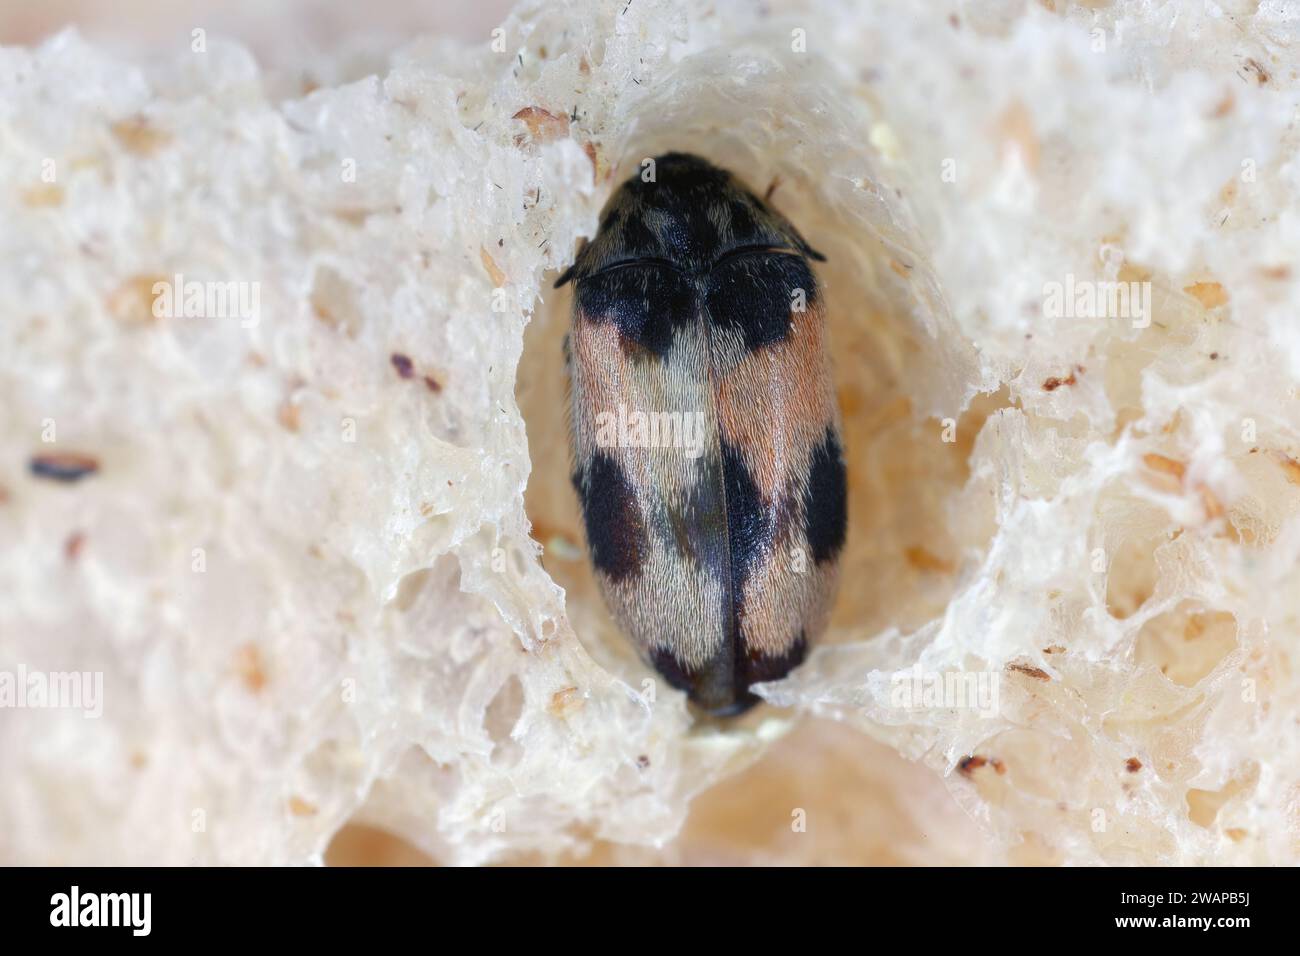 Attagenus bifasciatus, Carpet beetle. Beetles and larvae feed on food products and waste. Male beetle in the bread. Stock Photo